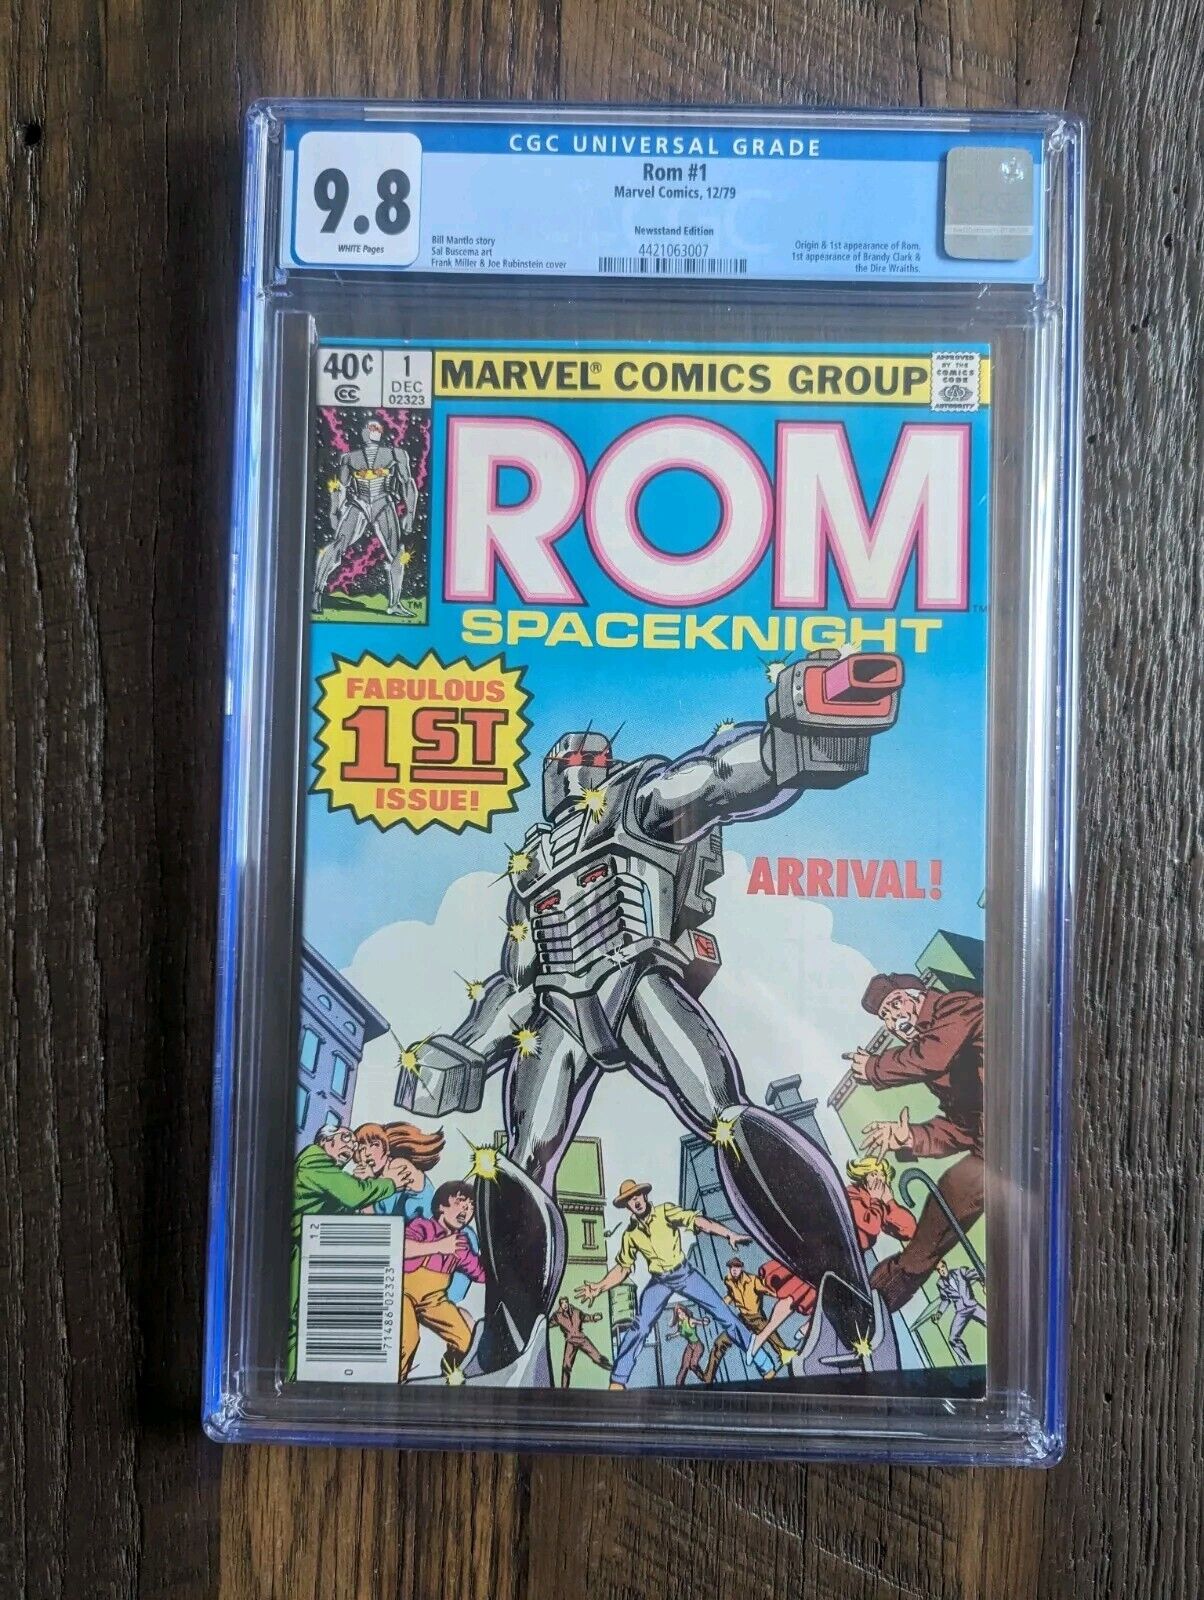 Rom Spaceknight #1, CGC 9.8, Newsstand, 1st Appearance ROM, WP, Marvel 1979 